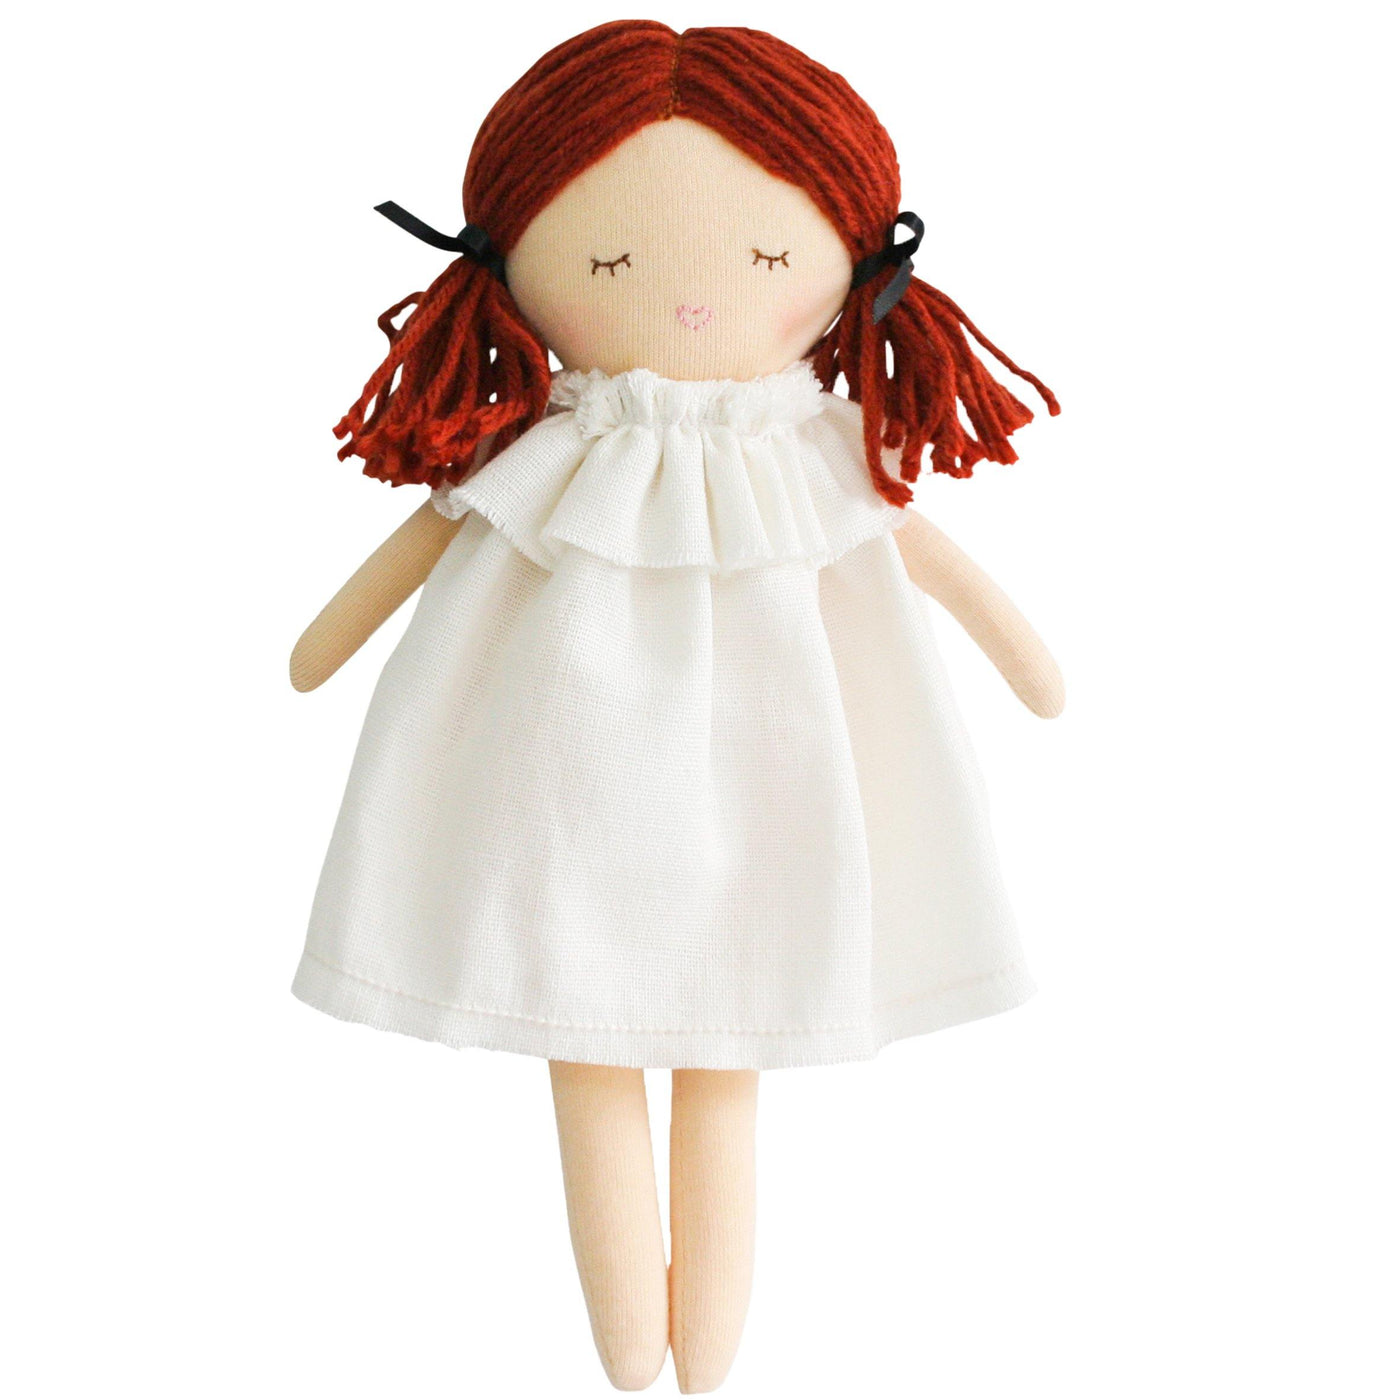 Matilda doll with white dress and brown hair with sleepy eyes